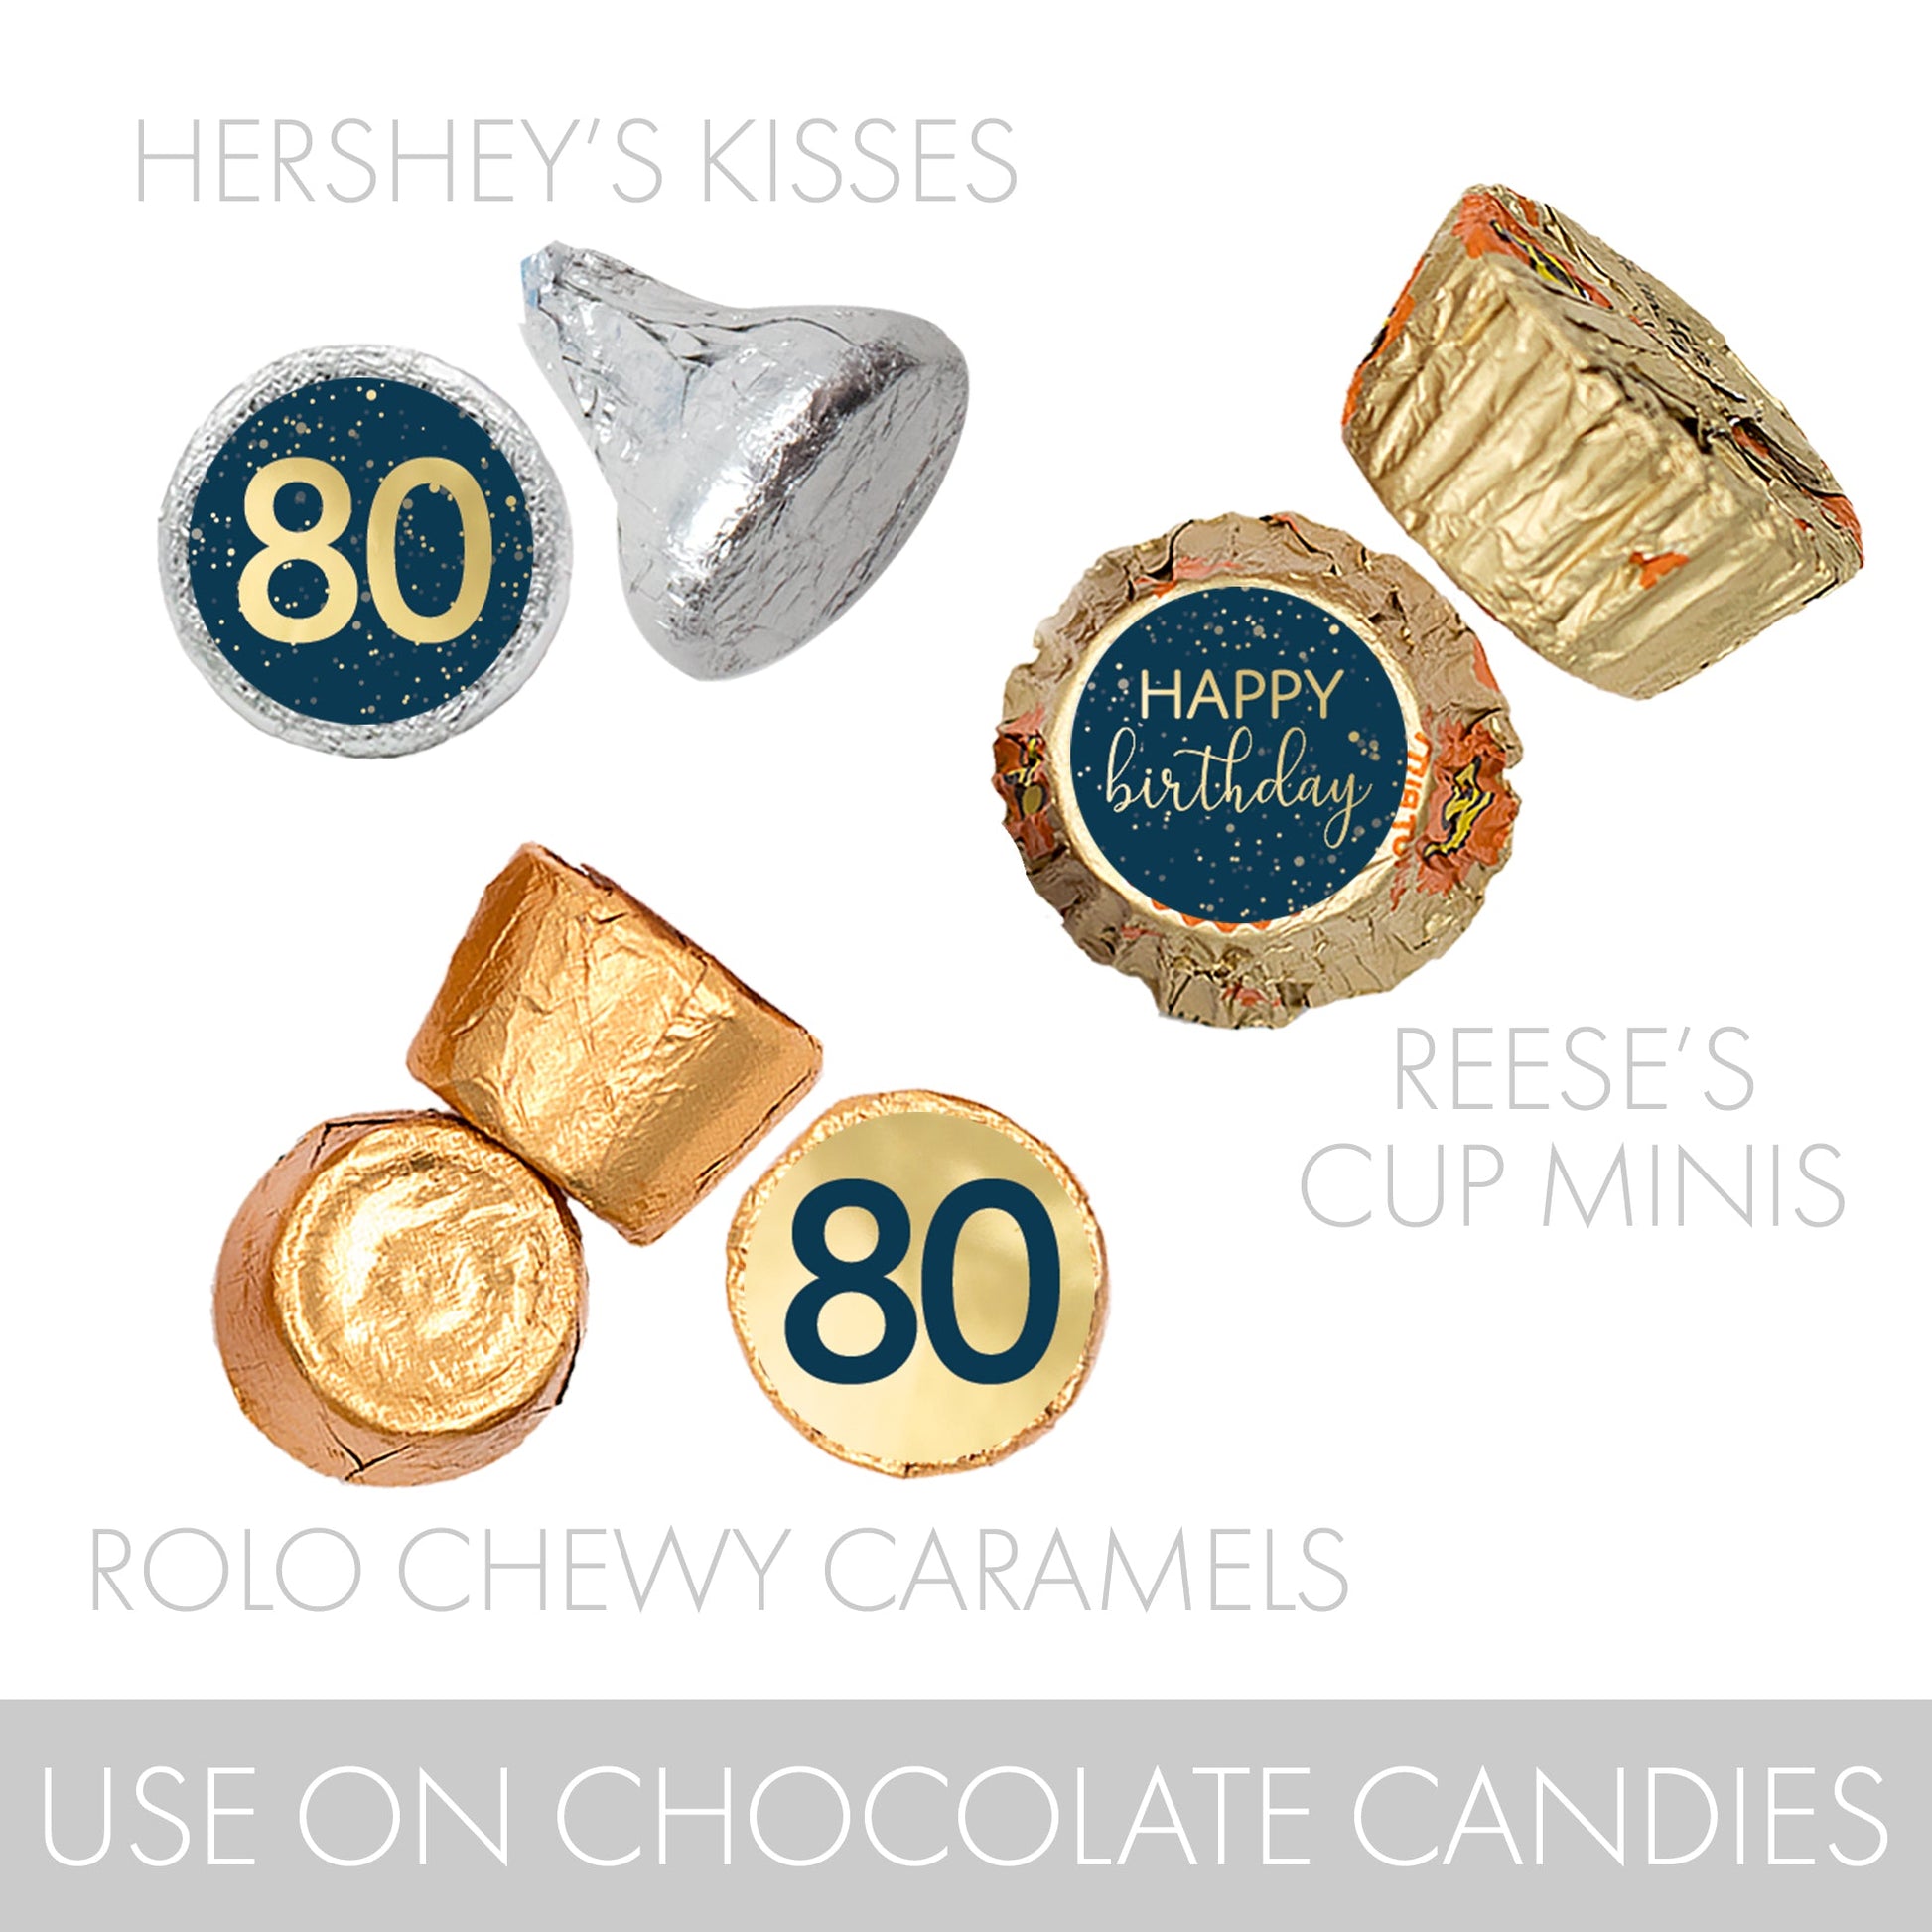 Celebrate your 80th birthday in style with these matching Hersheys Kisses stickers